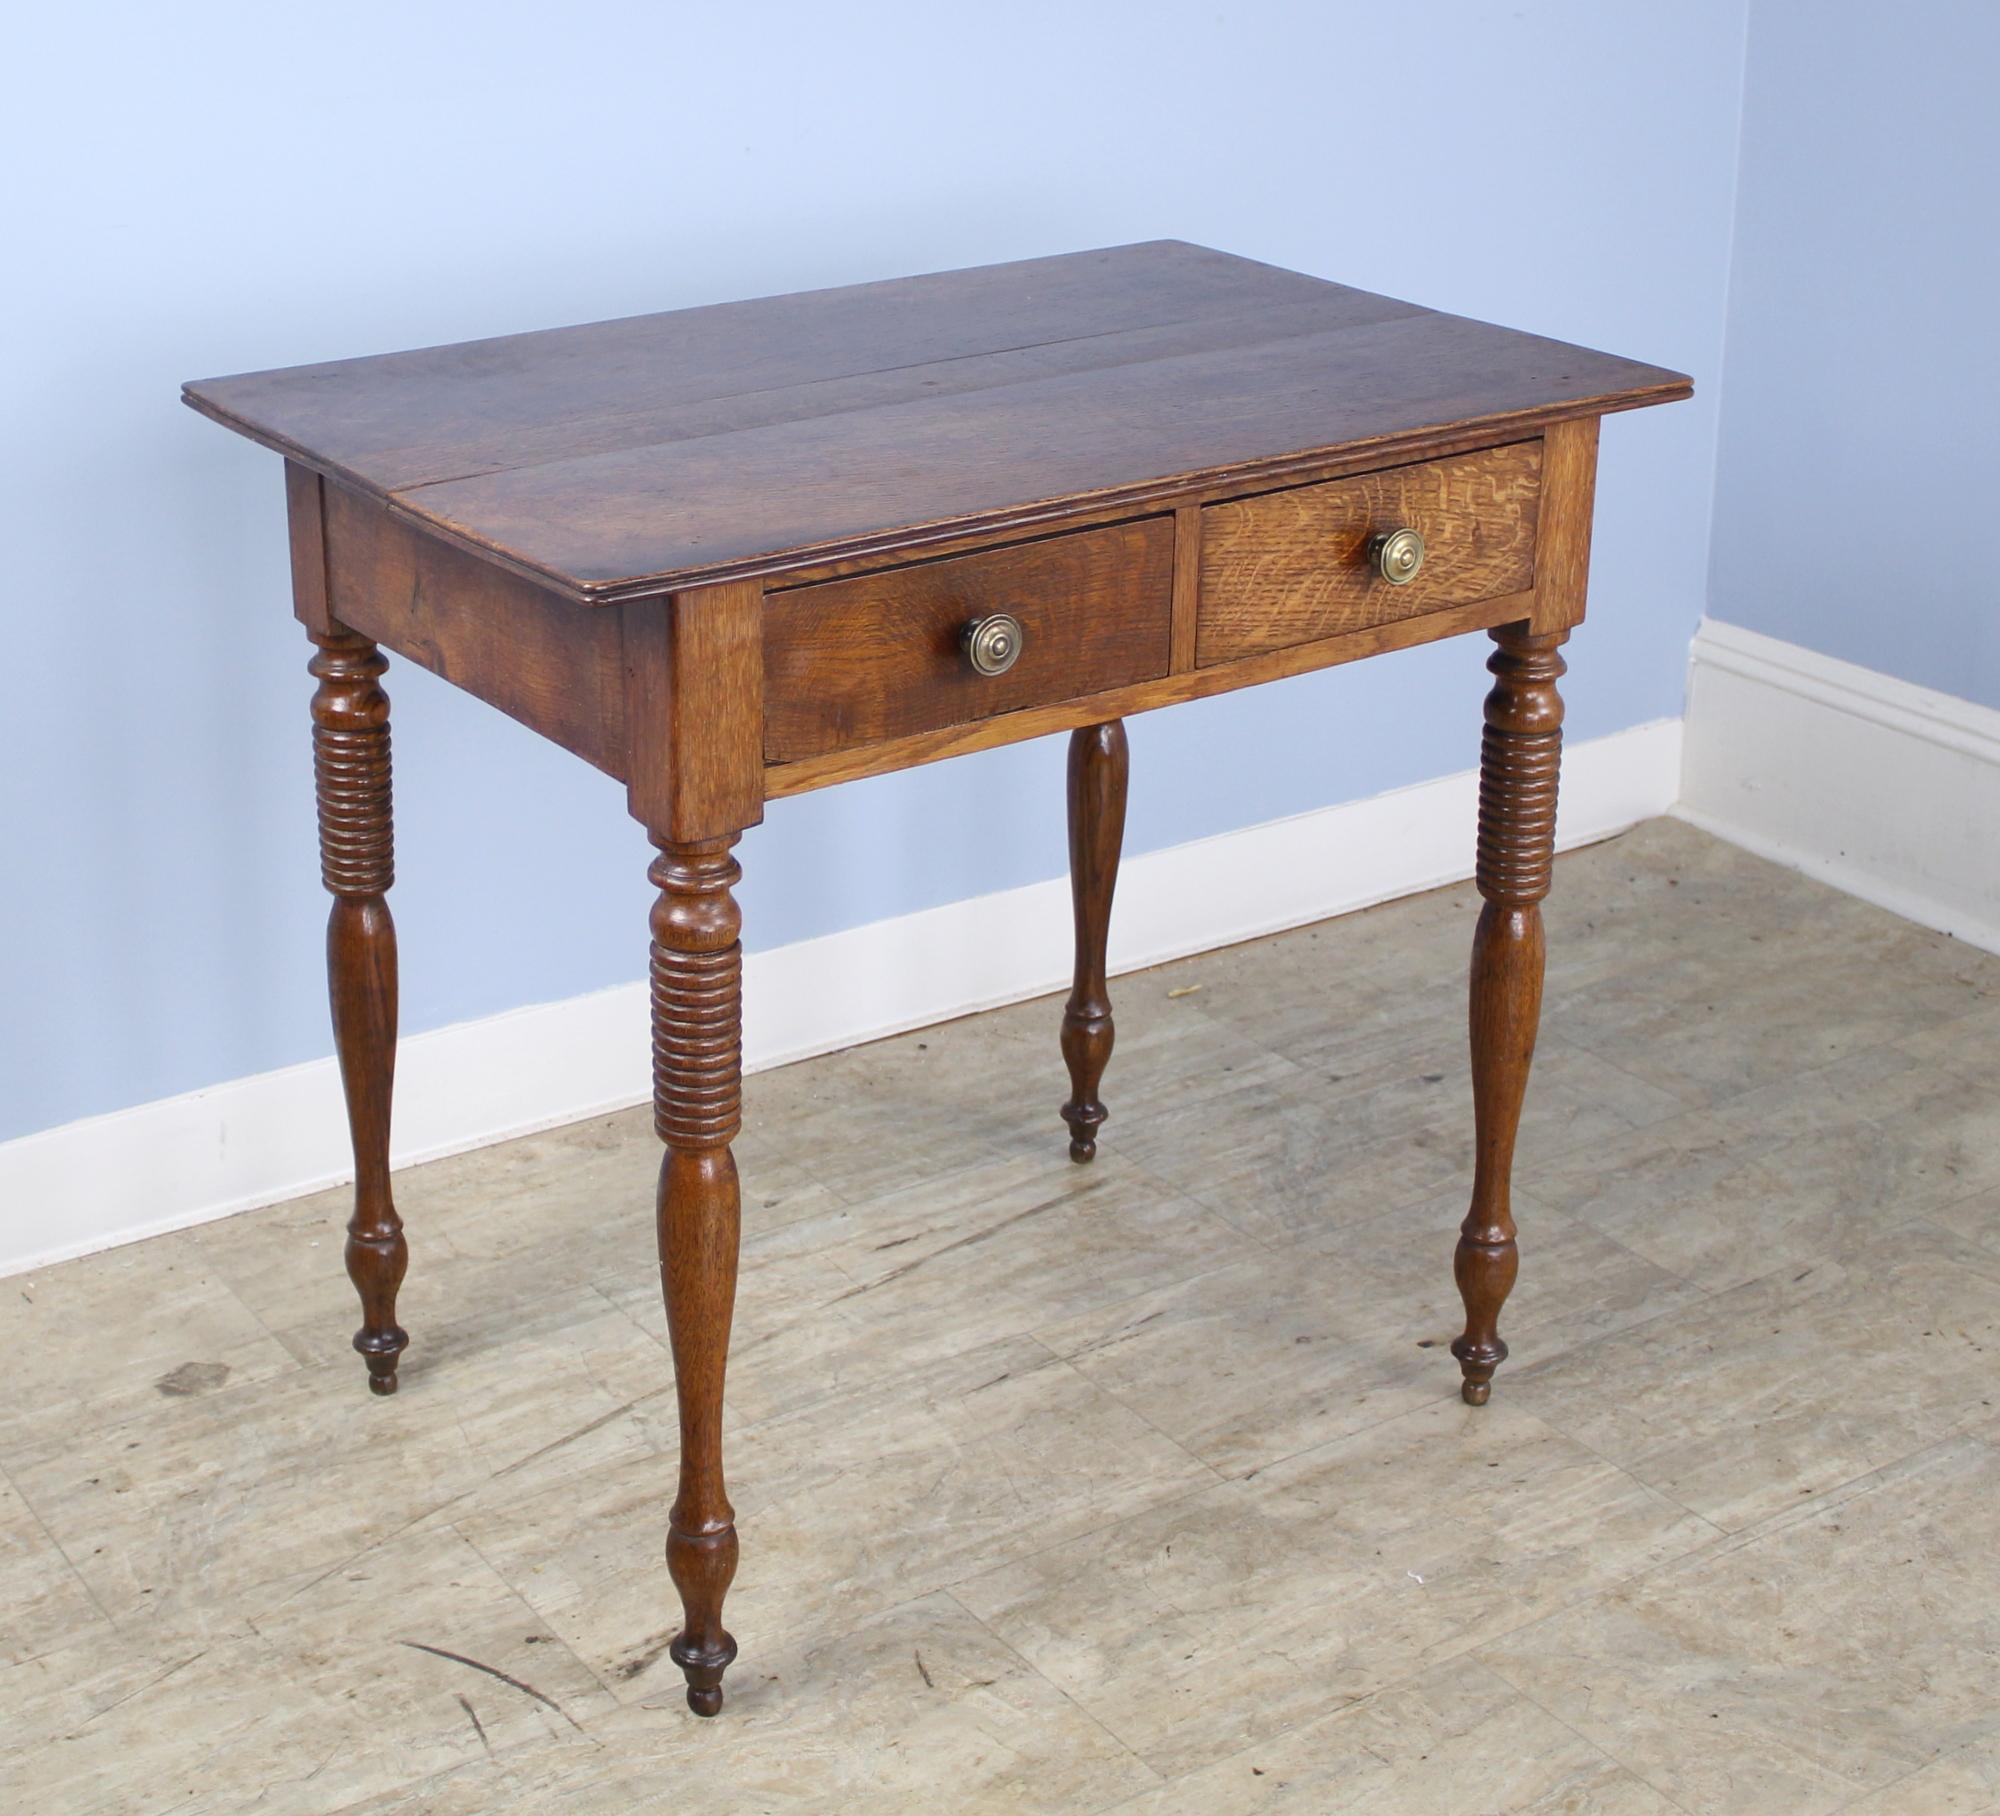 A charming French oak side table with two clean drawers and eye-catching turned legs. The top is in good condition and is accented with a reeded edge. Small ball feet complete the look.